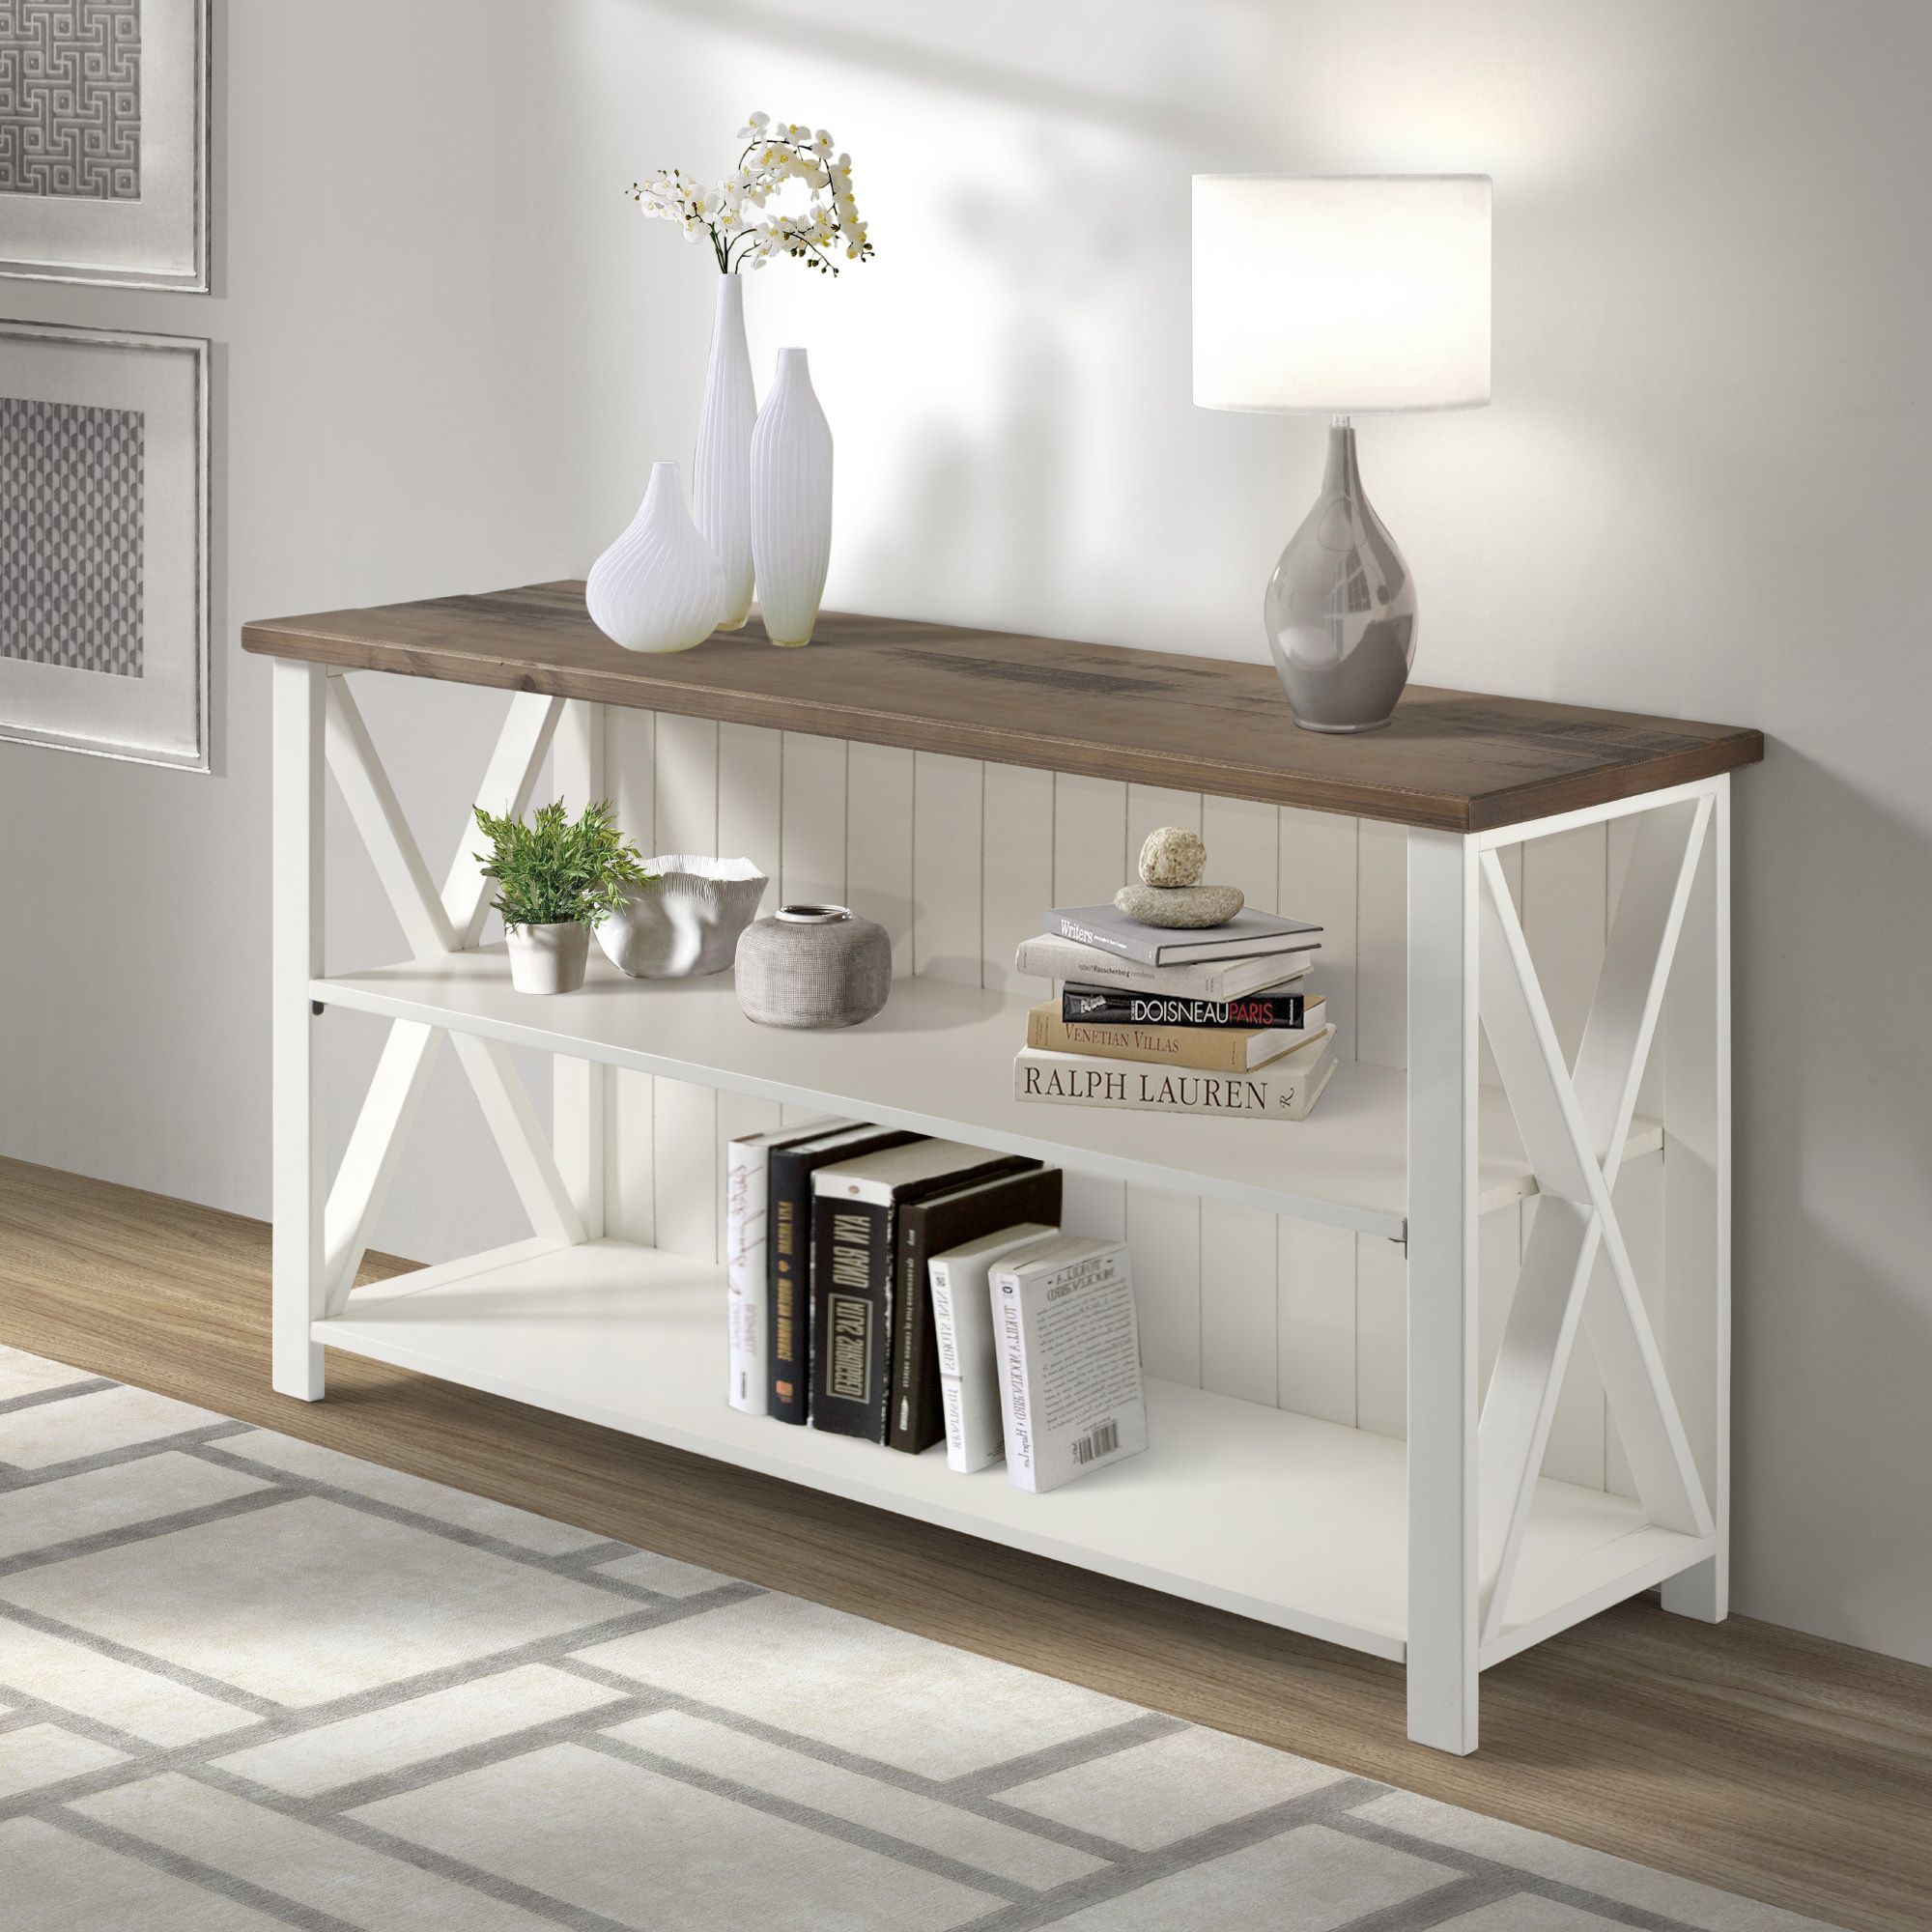 Woven Paths Solid Wood Storage Console Table, White Pertaining To Woven Paths Barn Door Tv Stands In Multiple Finishes (View 8 of 15)